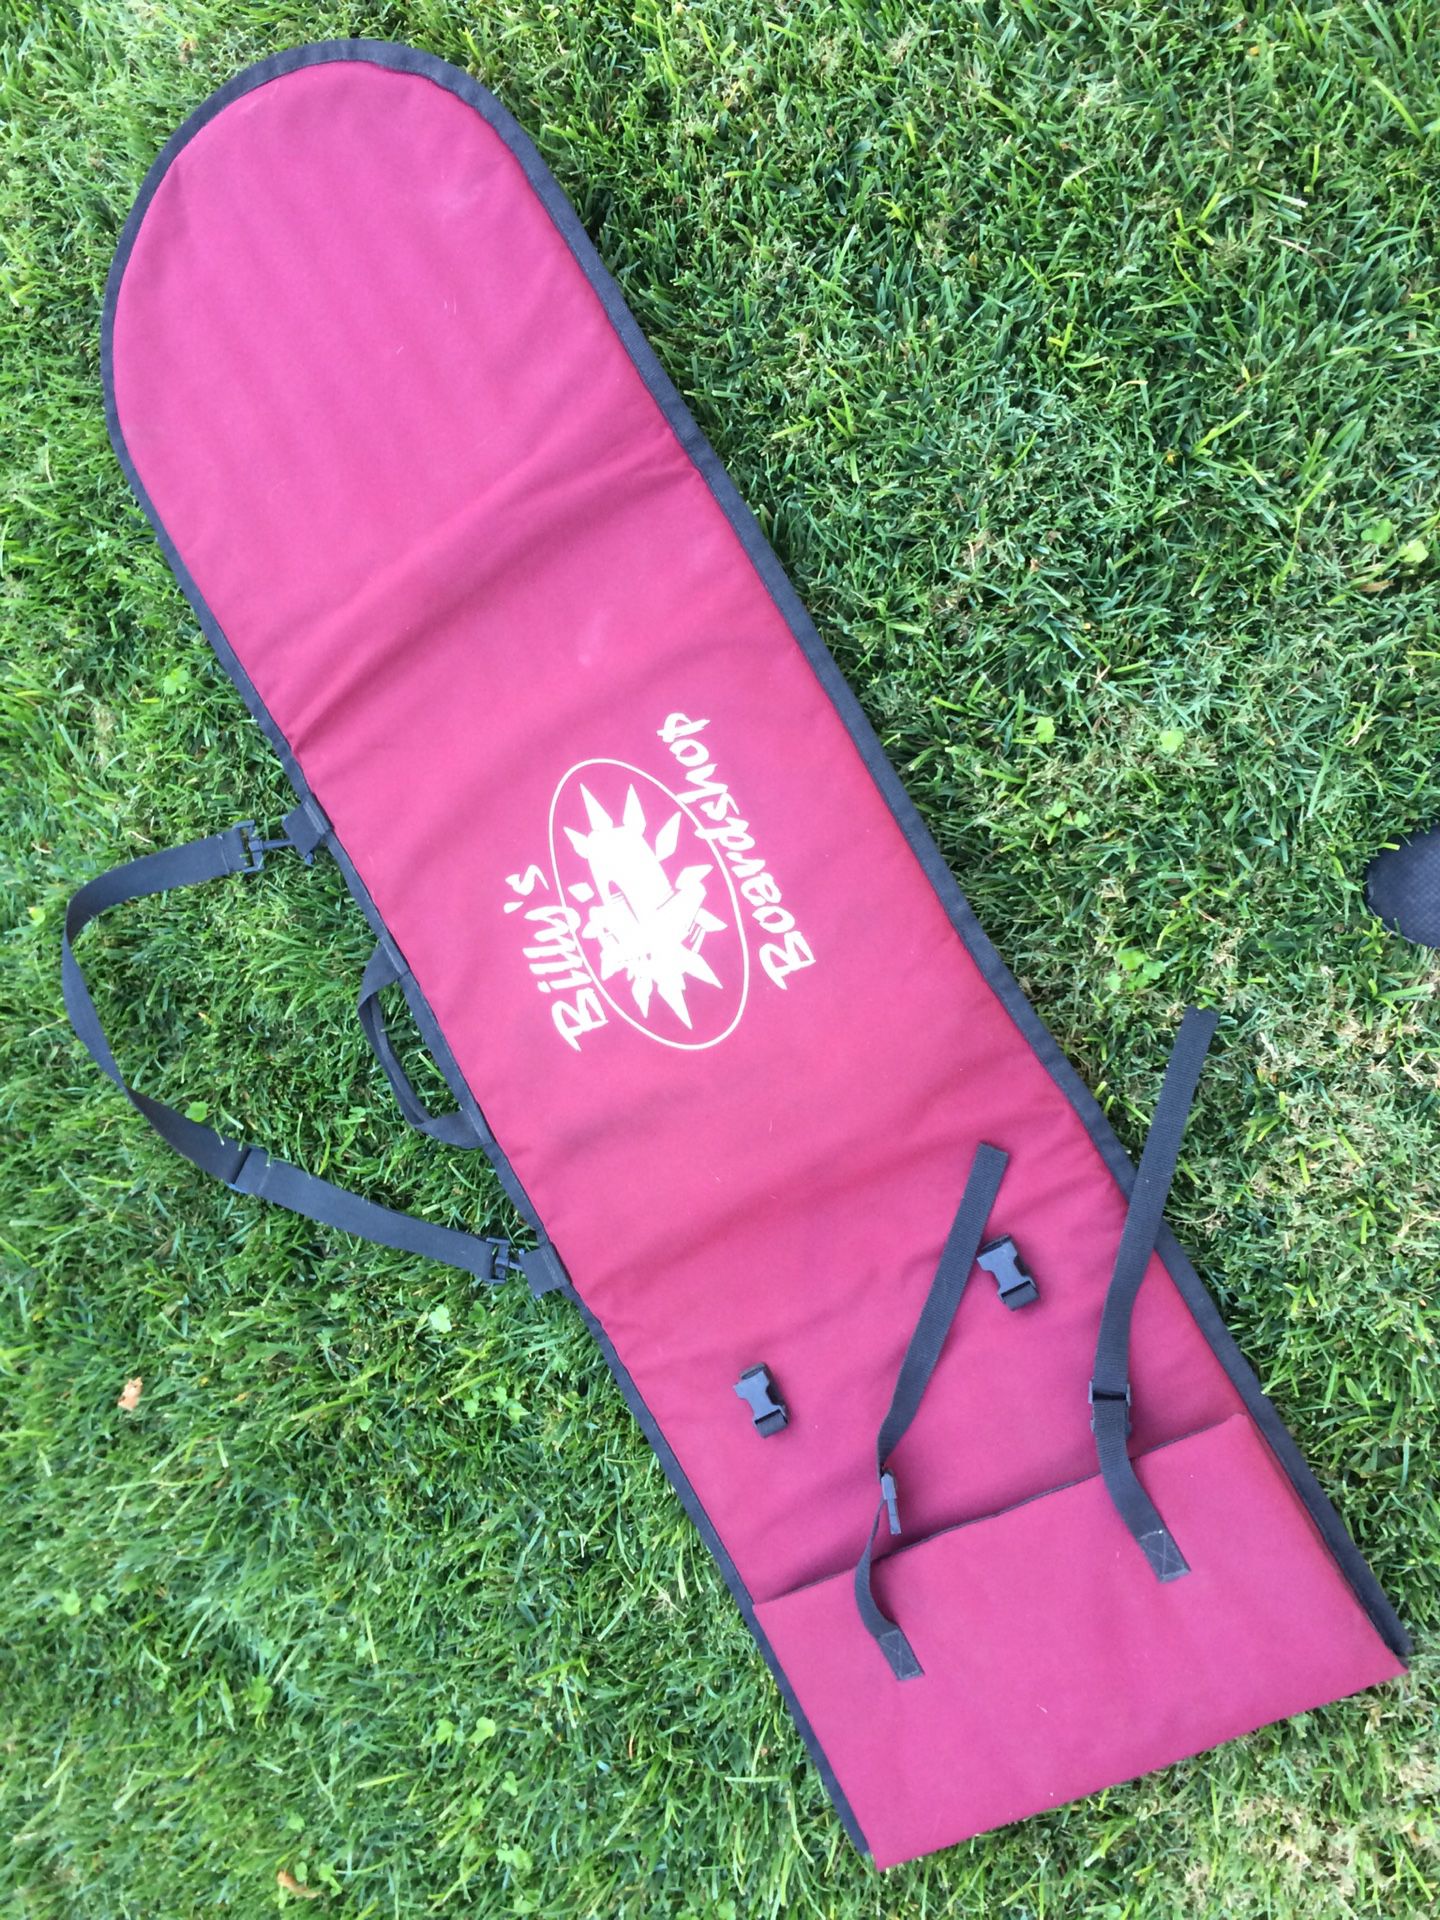 Snowboard bag for up to 5’10” long boards